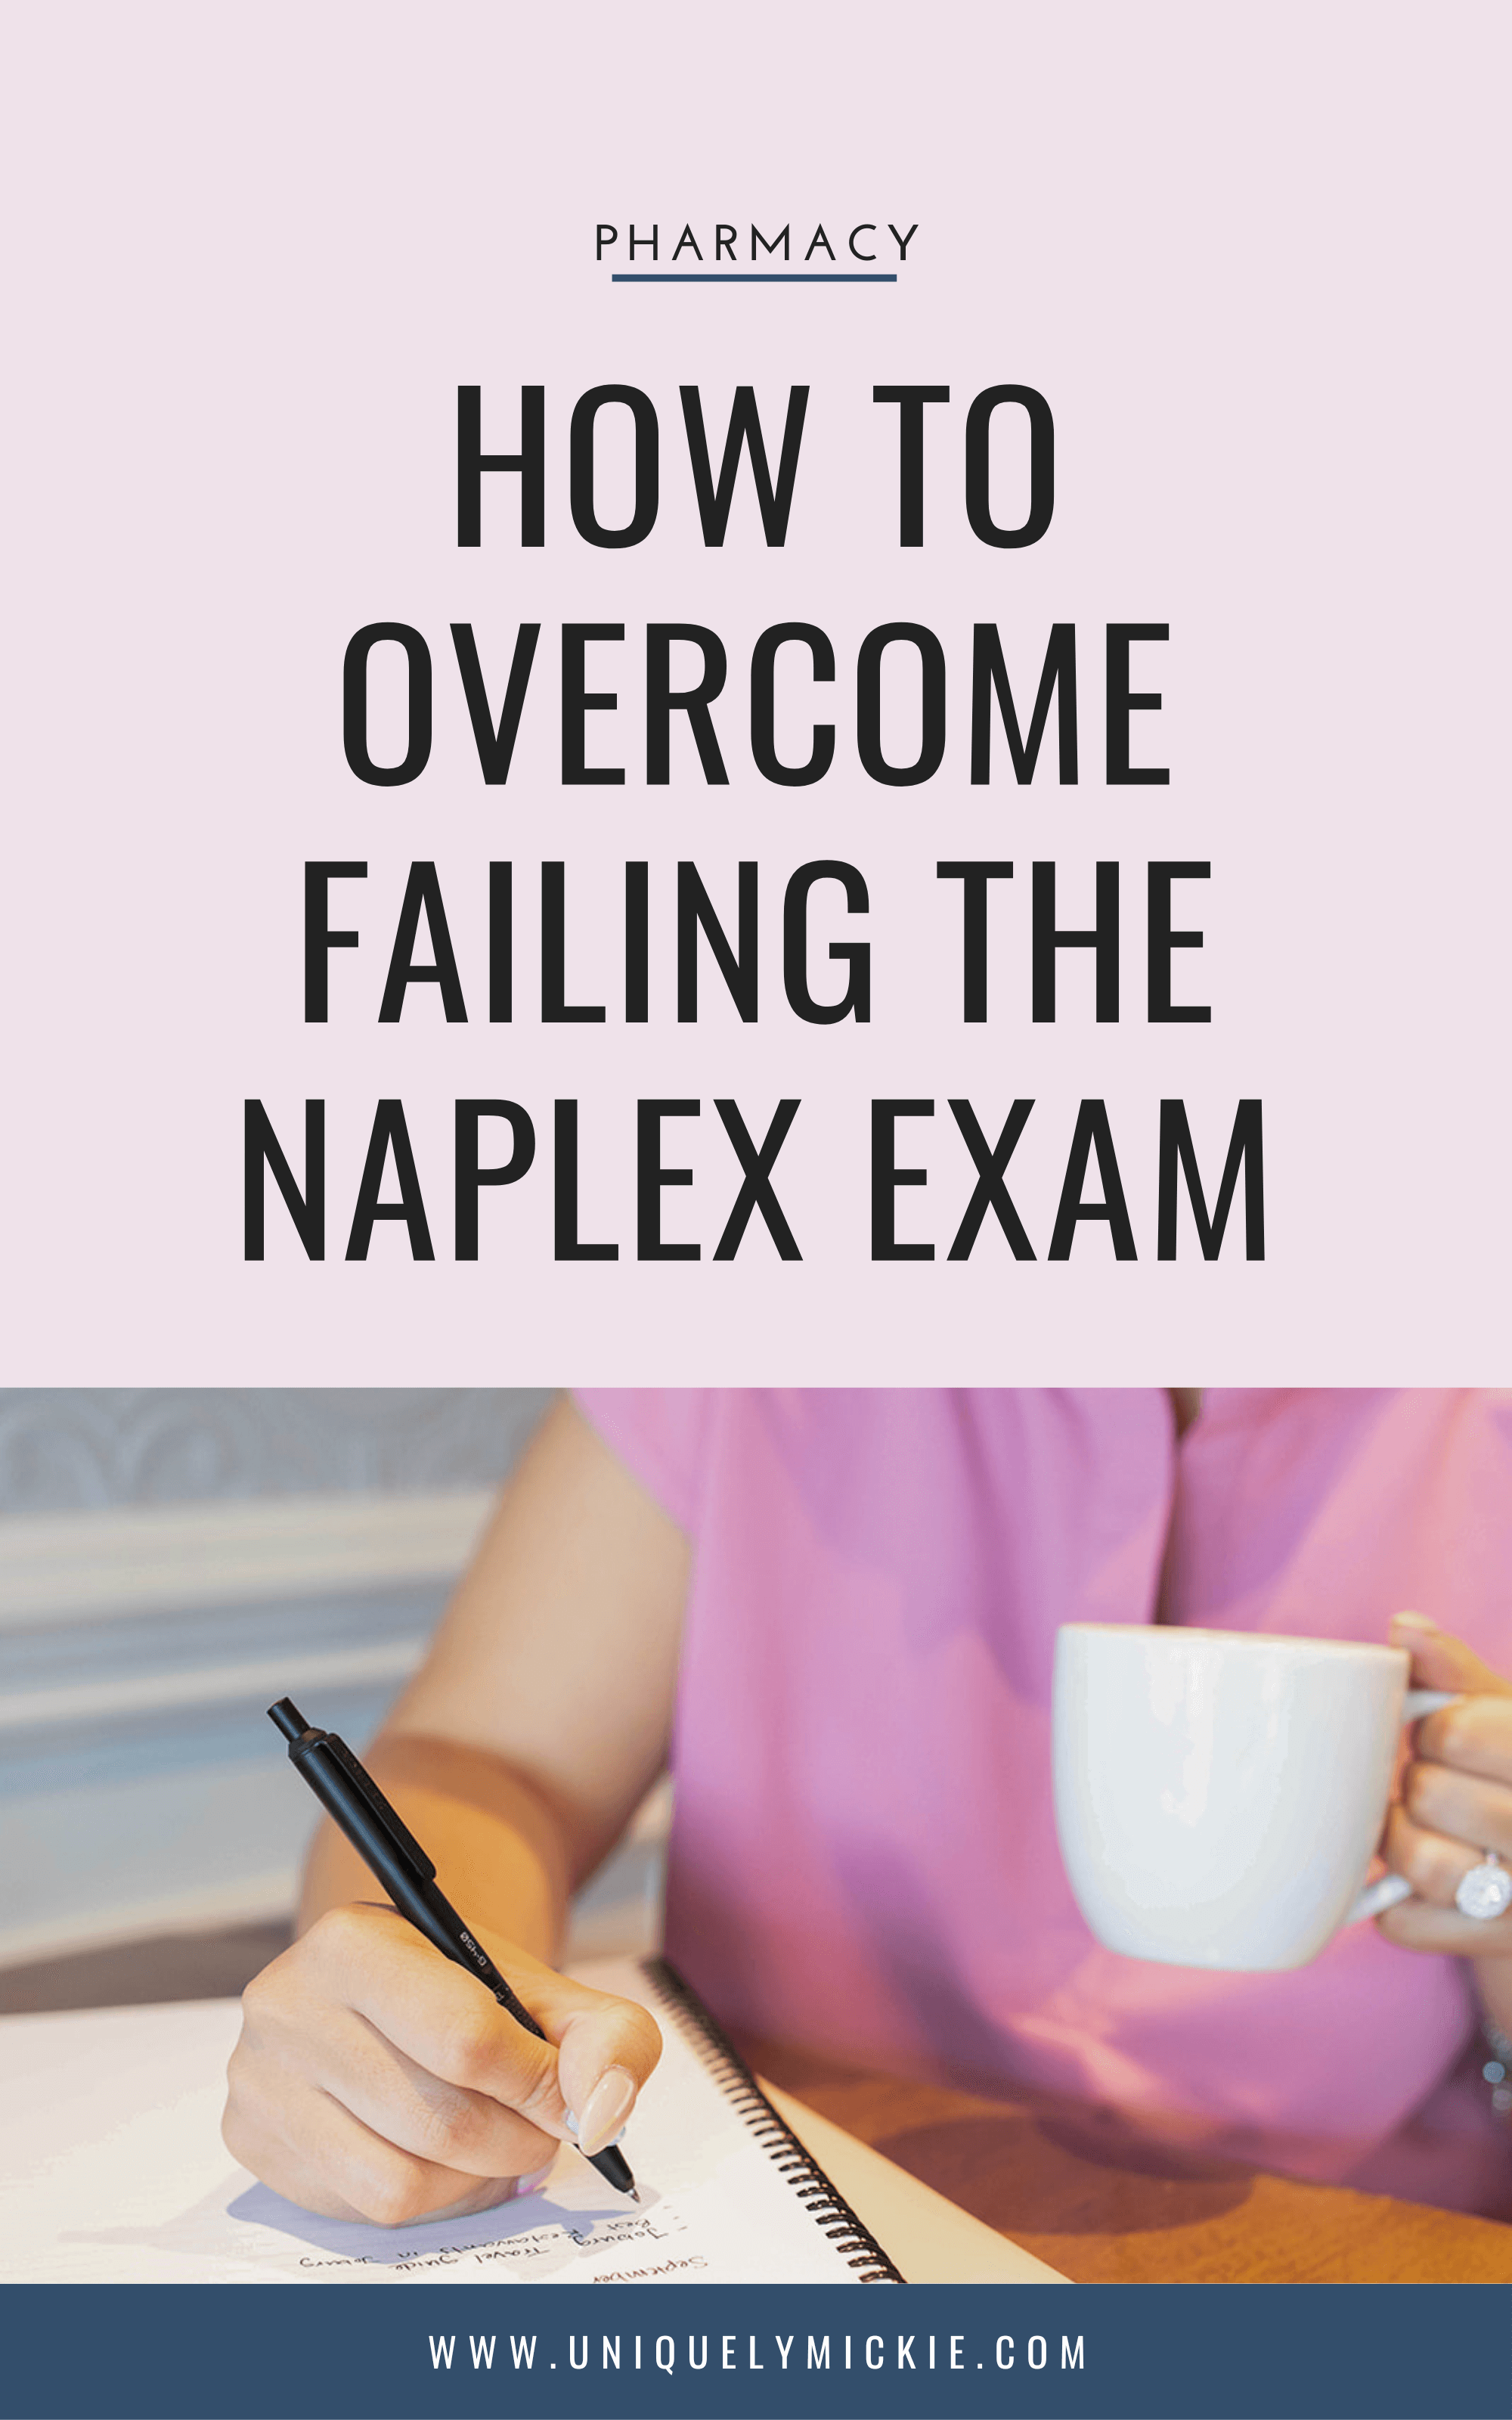 If you failed the NAPLEX exam, you're not alone and I promise it's not the end of the world. Here's my advice on how to move forward.